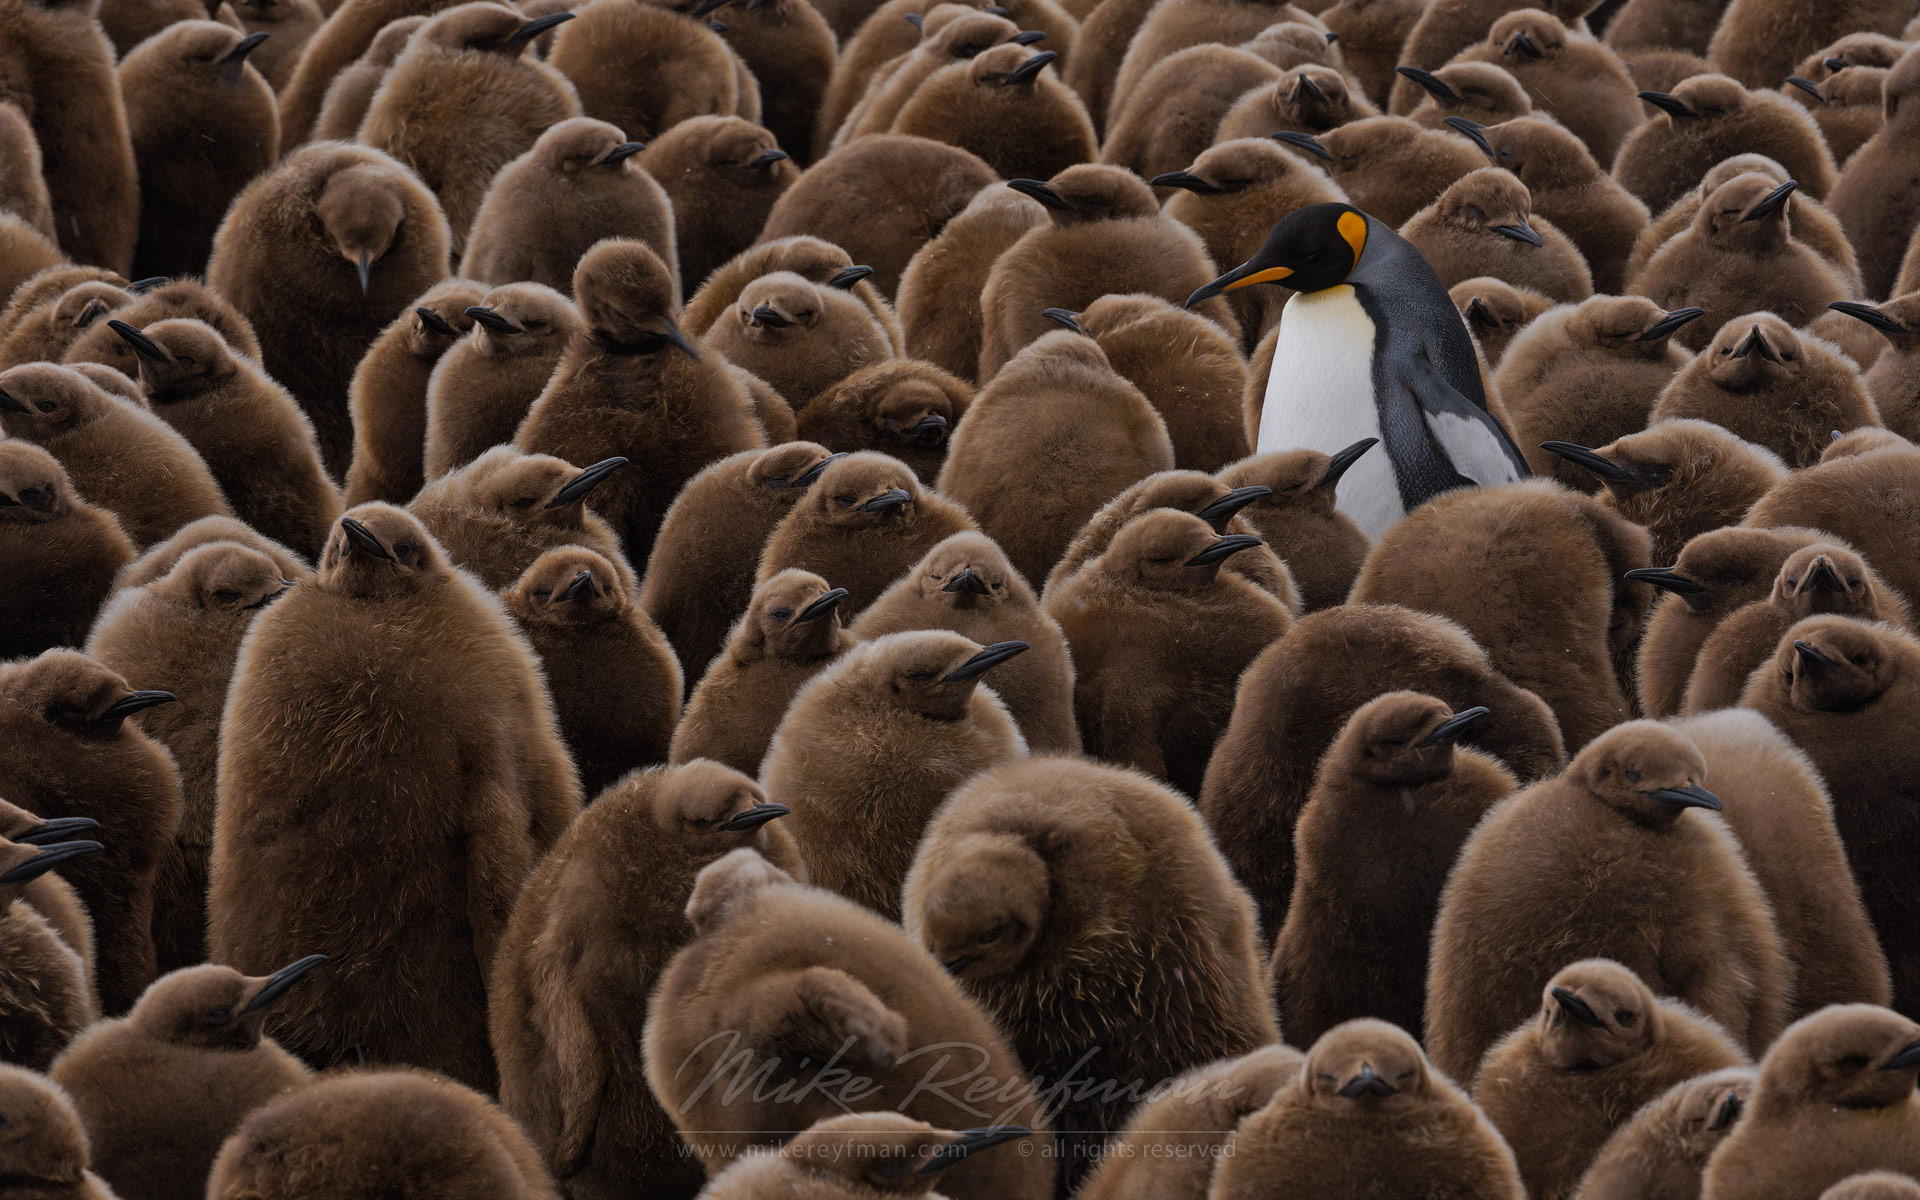 Adult King Penguin (Aptenodytes patagonicus) walking among youngsters and looking for its chick to feed it. King Penguin Creche. Salisbury Plain, South Georgia, Sub-Antarctic - King-Penguin-Chicks-In-Creche-South-Georgia-Sub-Antarctic - Mike Reyfman Photography